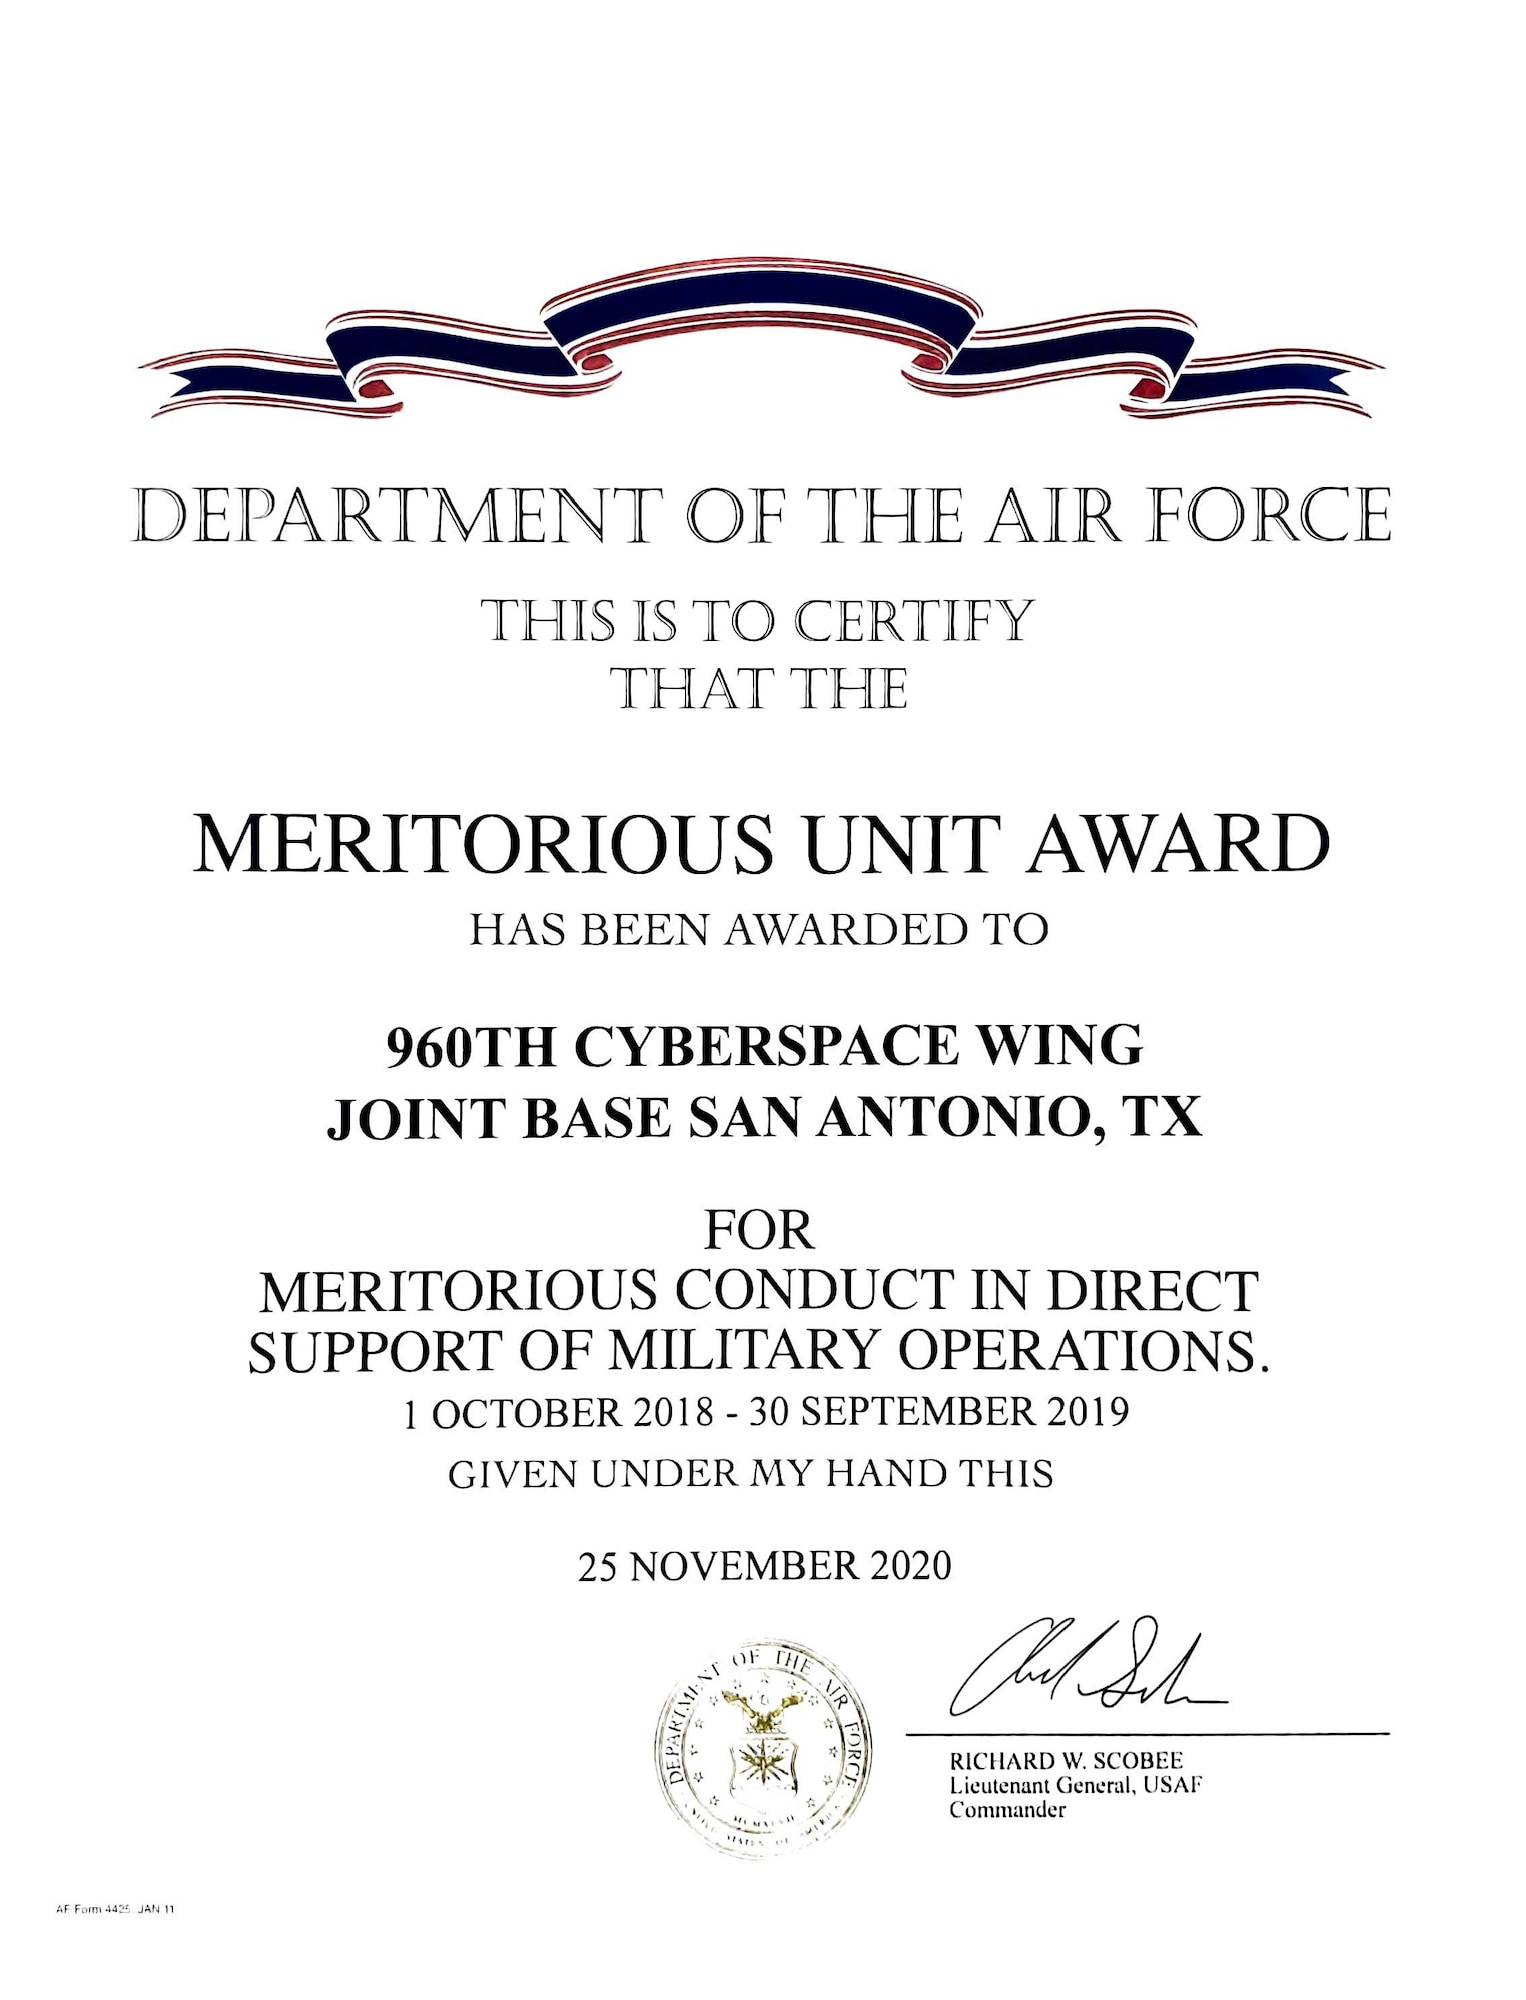 The 960th Cyberspace Wing at Joint Base San Antonio-Chapman Training Annex, Texas, is a recipient of the Air Force Meritorious Unit Award, as of Nov. 25, 2020. The award was given for exceptionally meritorious conduct in direct support of combat operations from Oct. 1, 2018, to Sept. 30, 2019. (U.S. Air Force courtesy photo)